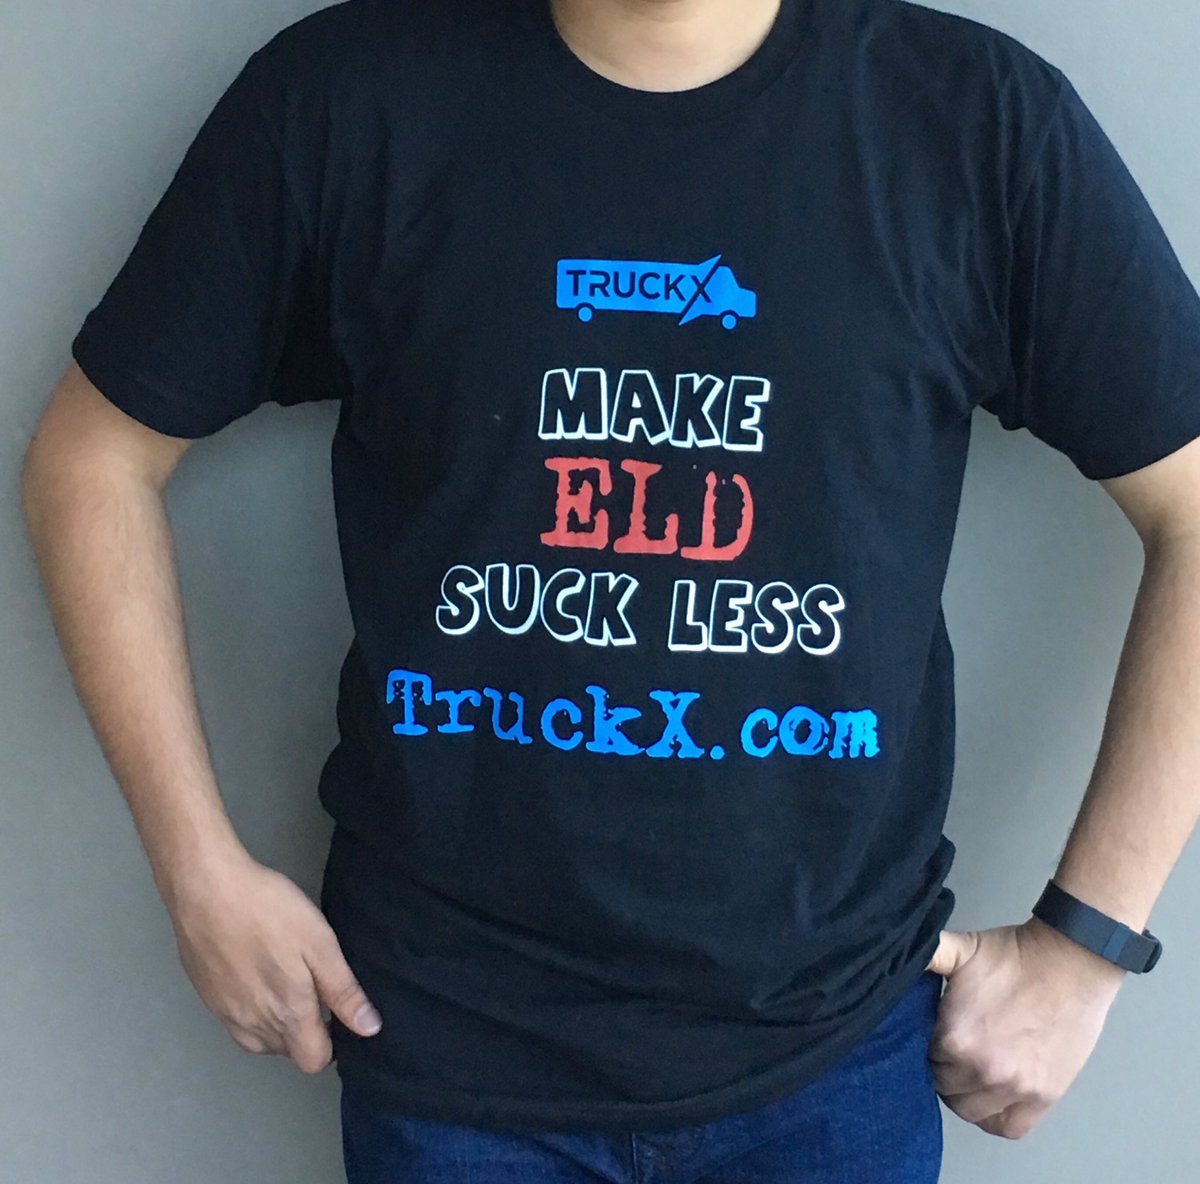 Check us out @TruckShow booth#11027 Free app: truckx.com/app #trucking #truckdrivers #truckerschat